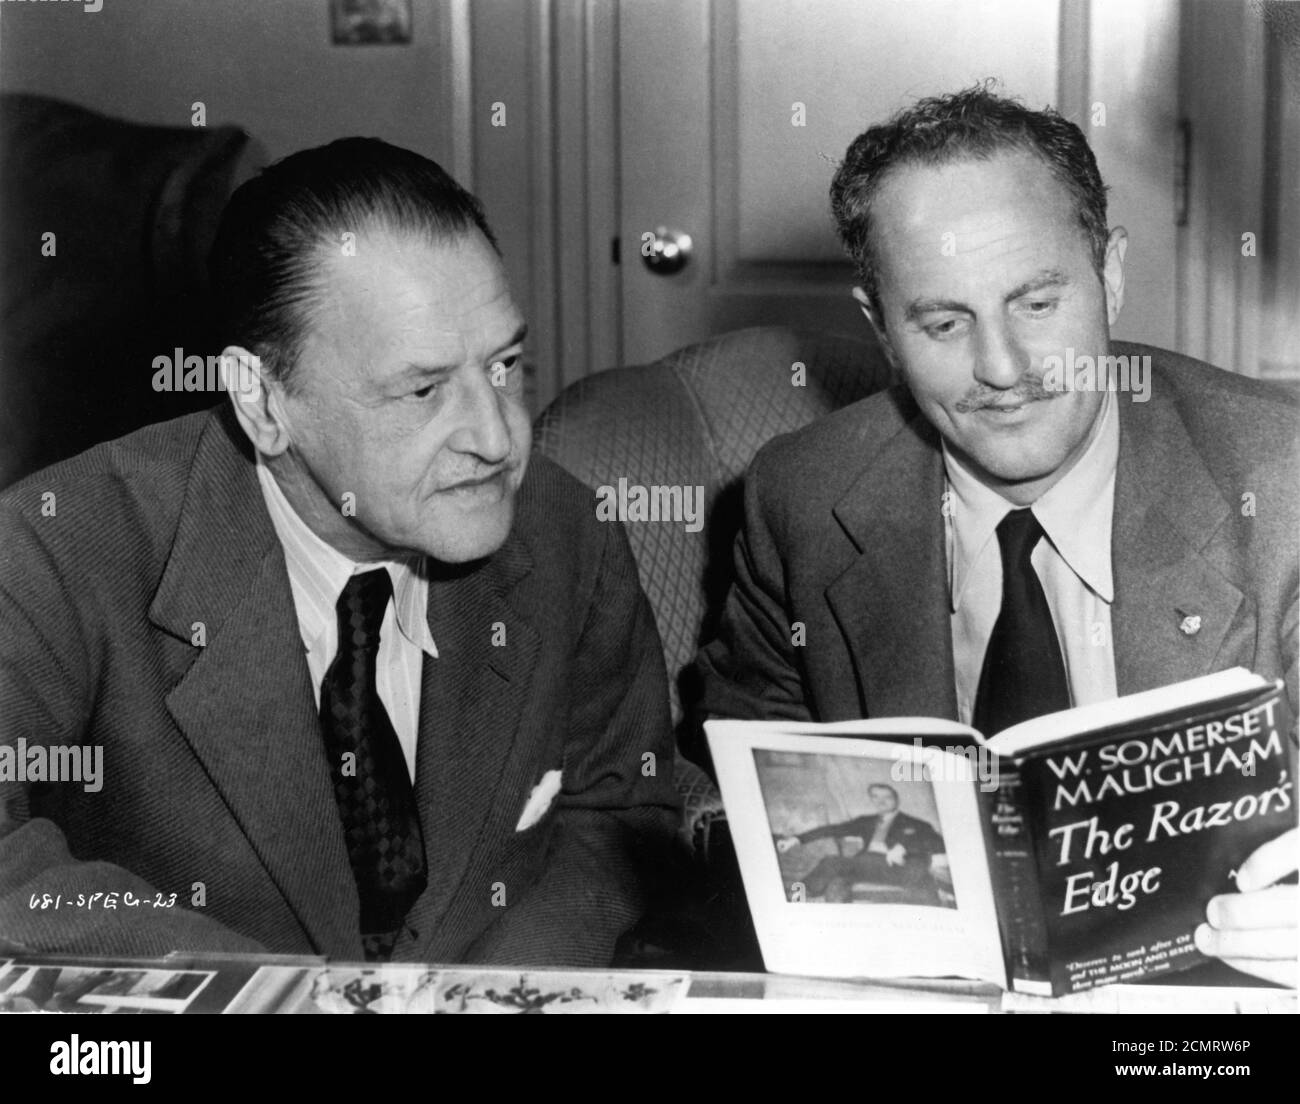 Author W. SOMERSET MAUGHAM and producer DARRYL F. ZANUCK candid during production of the film version of THE RAZOR'S EDGE 1946 director EDMUND GOULDING novel W. Somerset Maugham screenplay Lamar Trotti  music Alfred Newman producer Darryl F. Zanuck Twentieth Century Fox Stock Photo